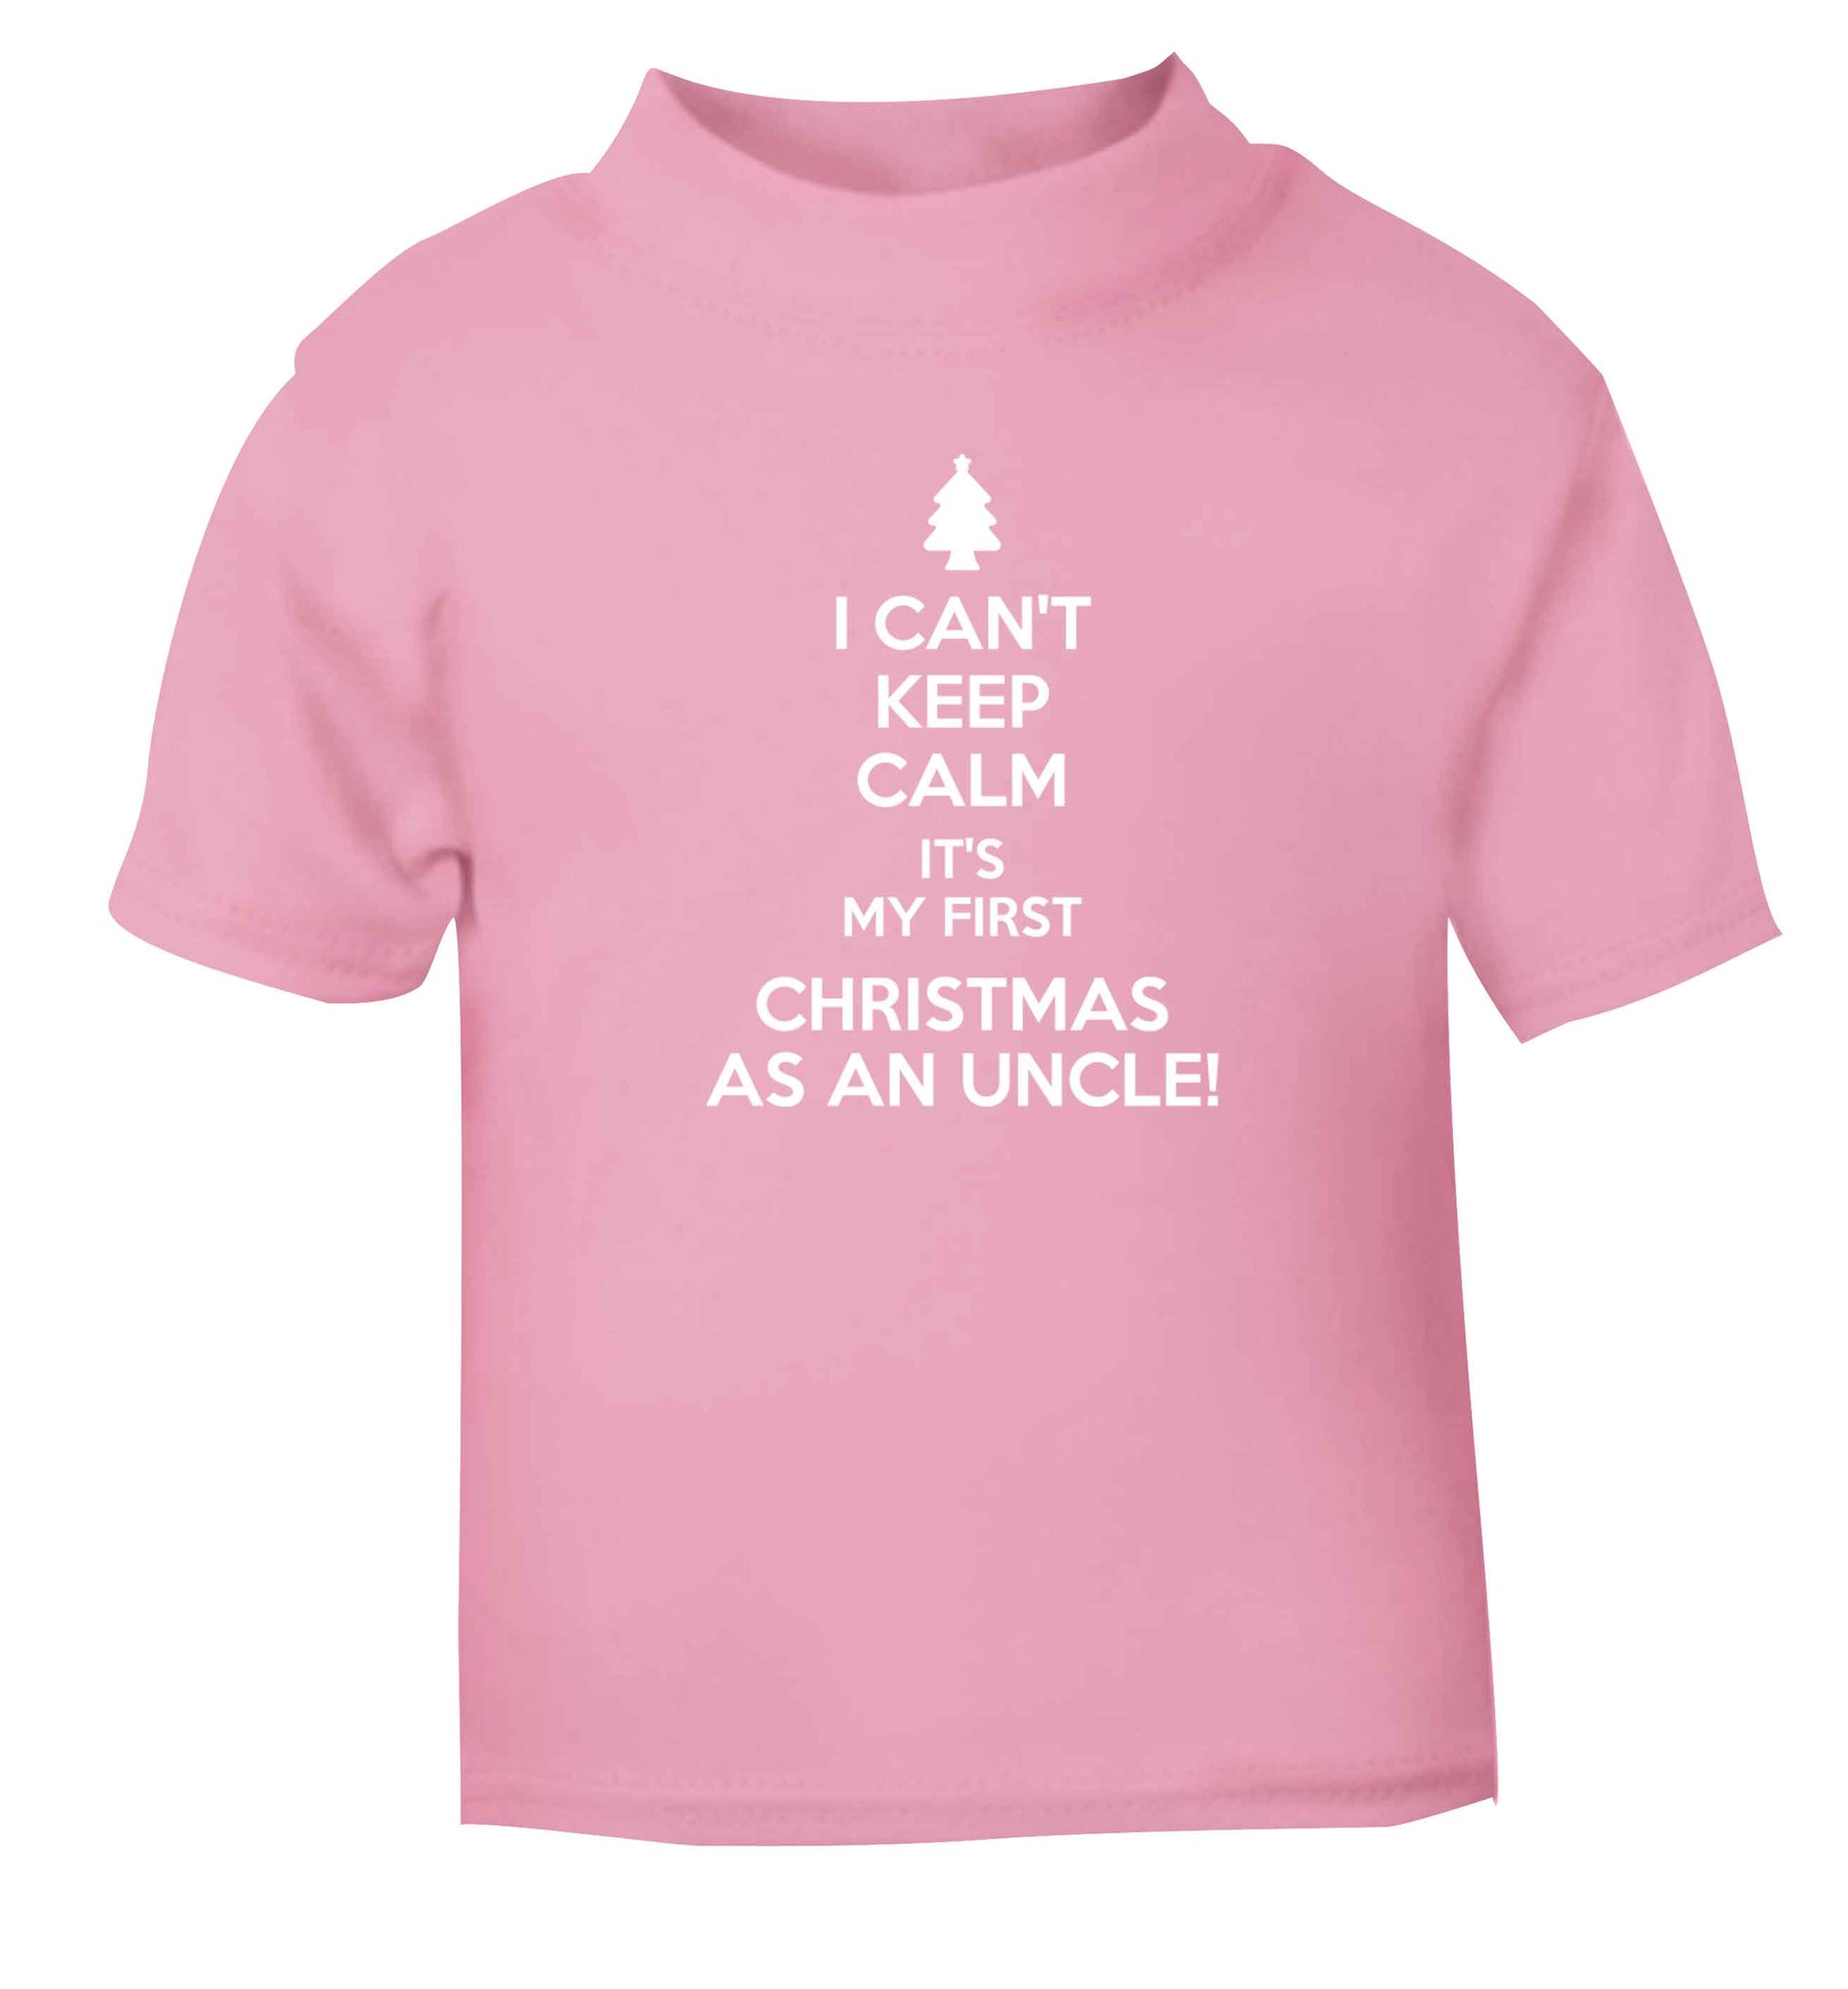 I can't keep calm it's my first Christmas as an uncle! light pink Baby Toddler Tshirt 2 Years